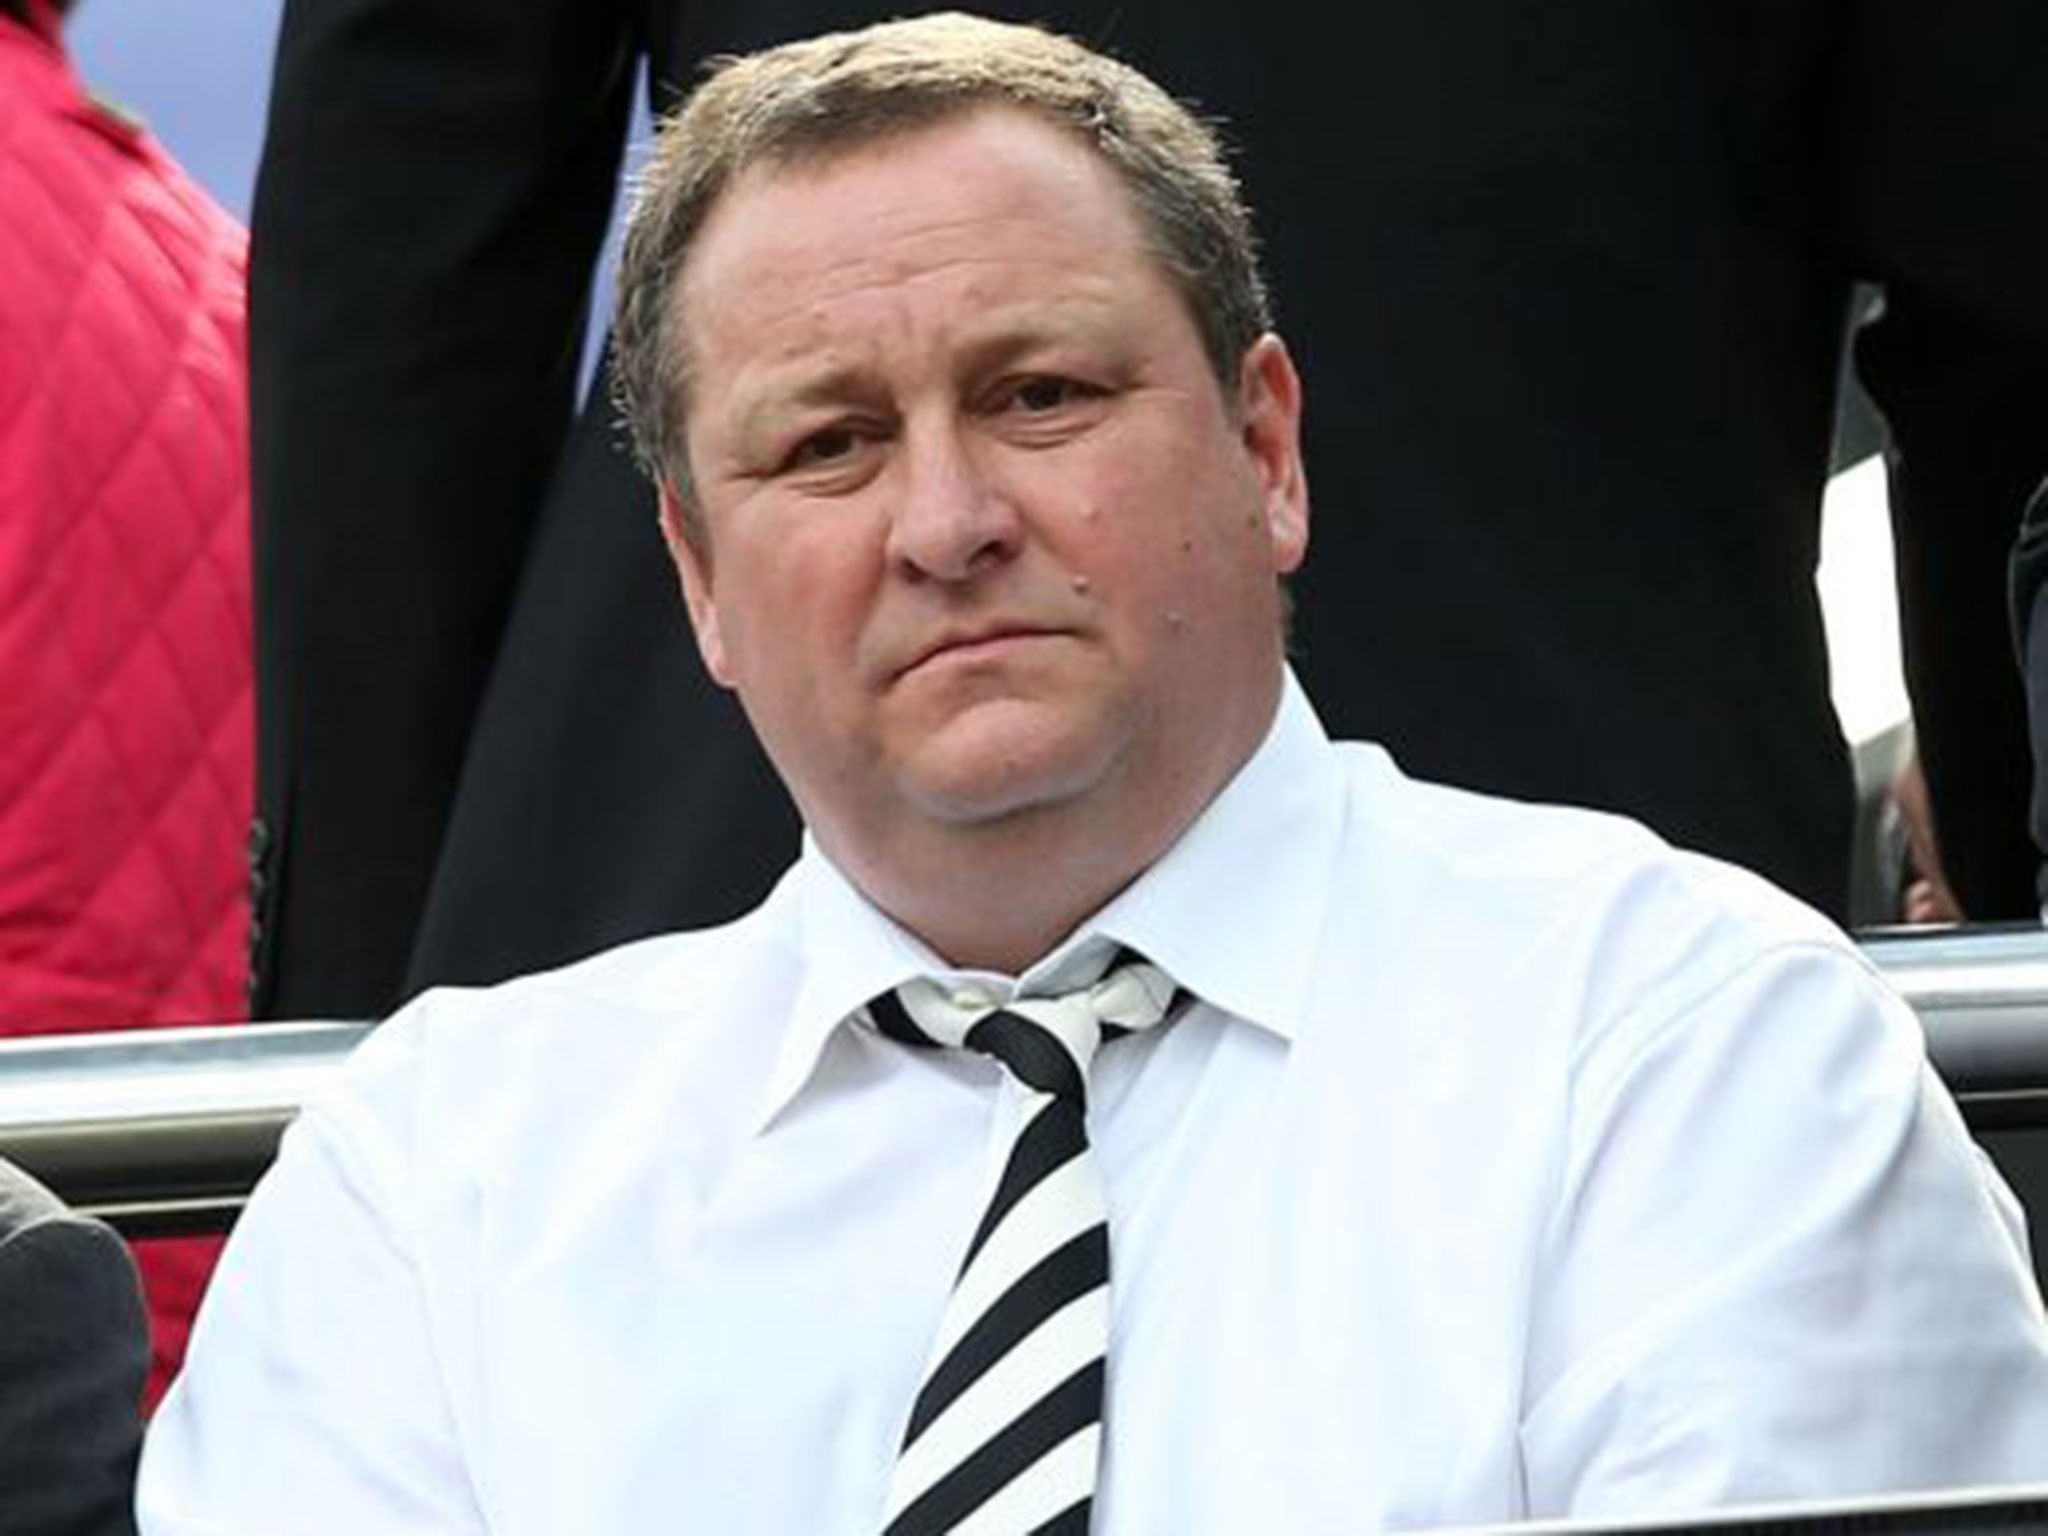 The Business Committee would like to hear from Mike Ashley over how he runs Sports Direct